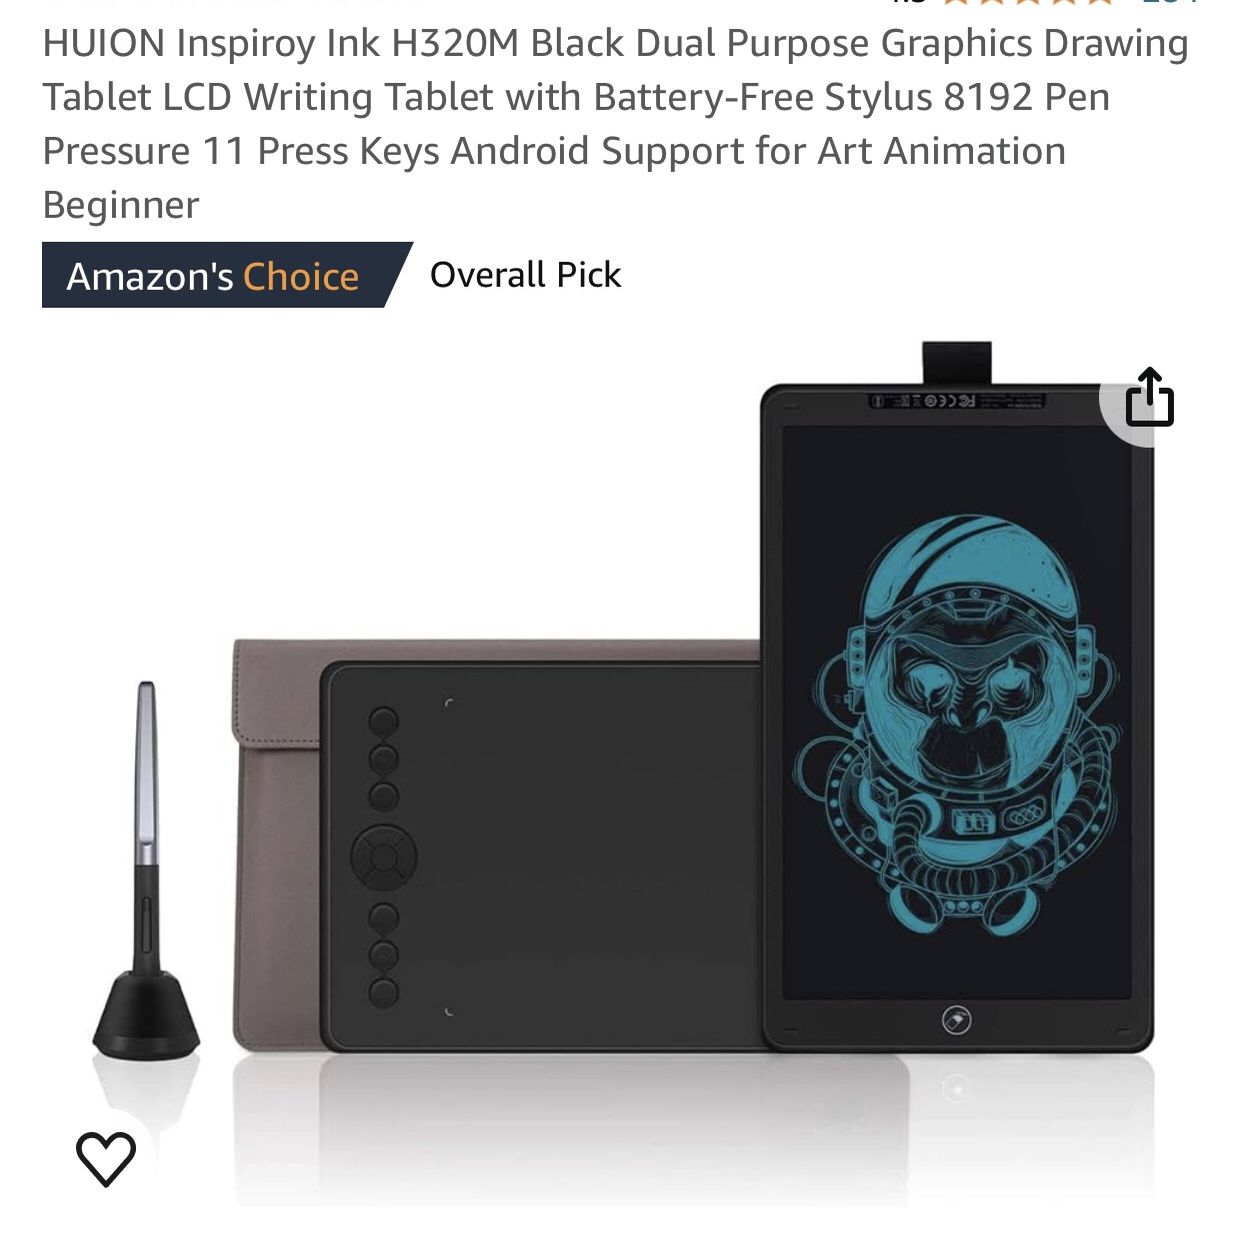 HUION Inspiroy Ink H320M